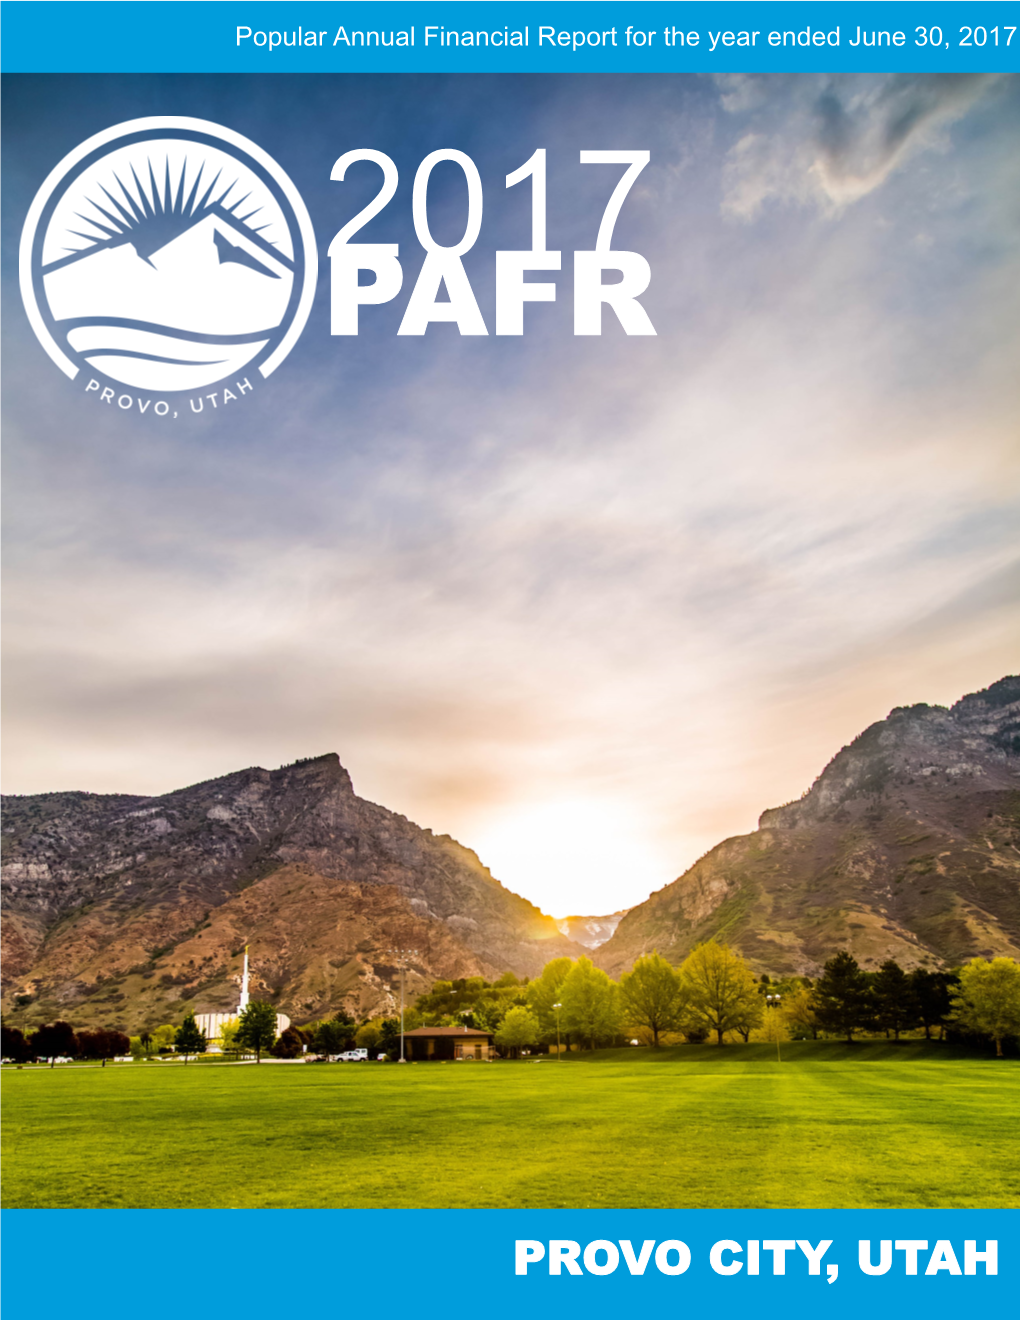 Popular Annual Financial Report for the Year Ended June 30, 2017 2017 PAFR